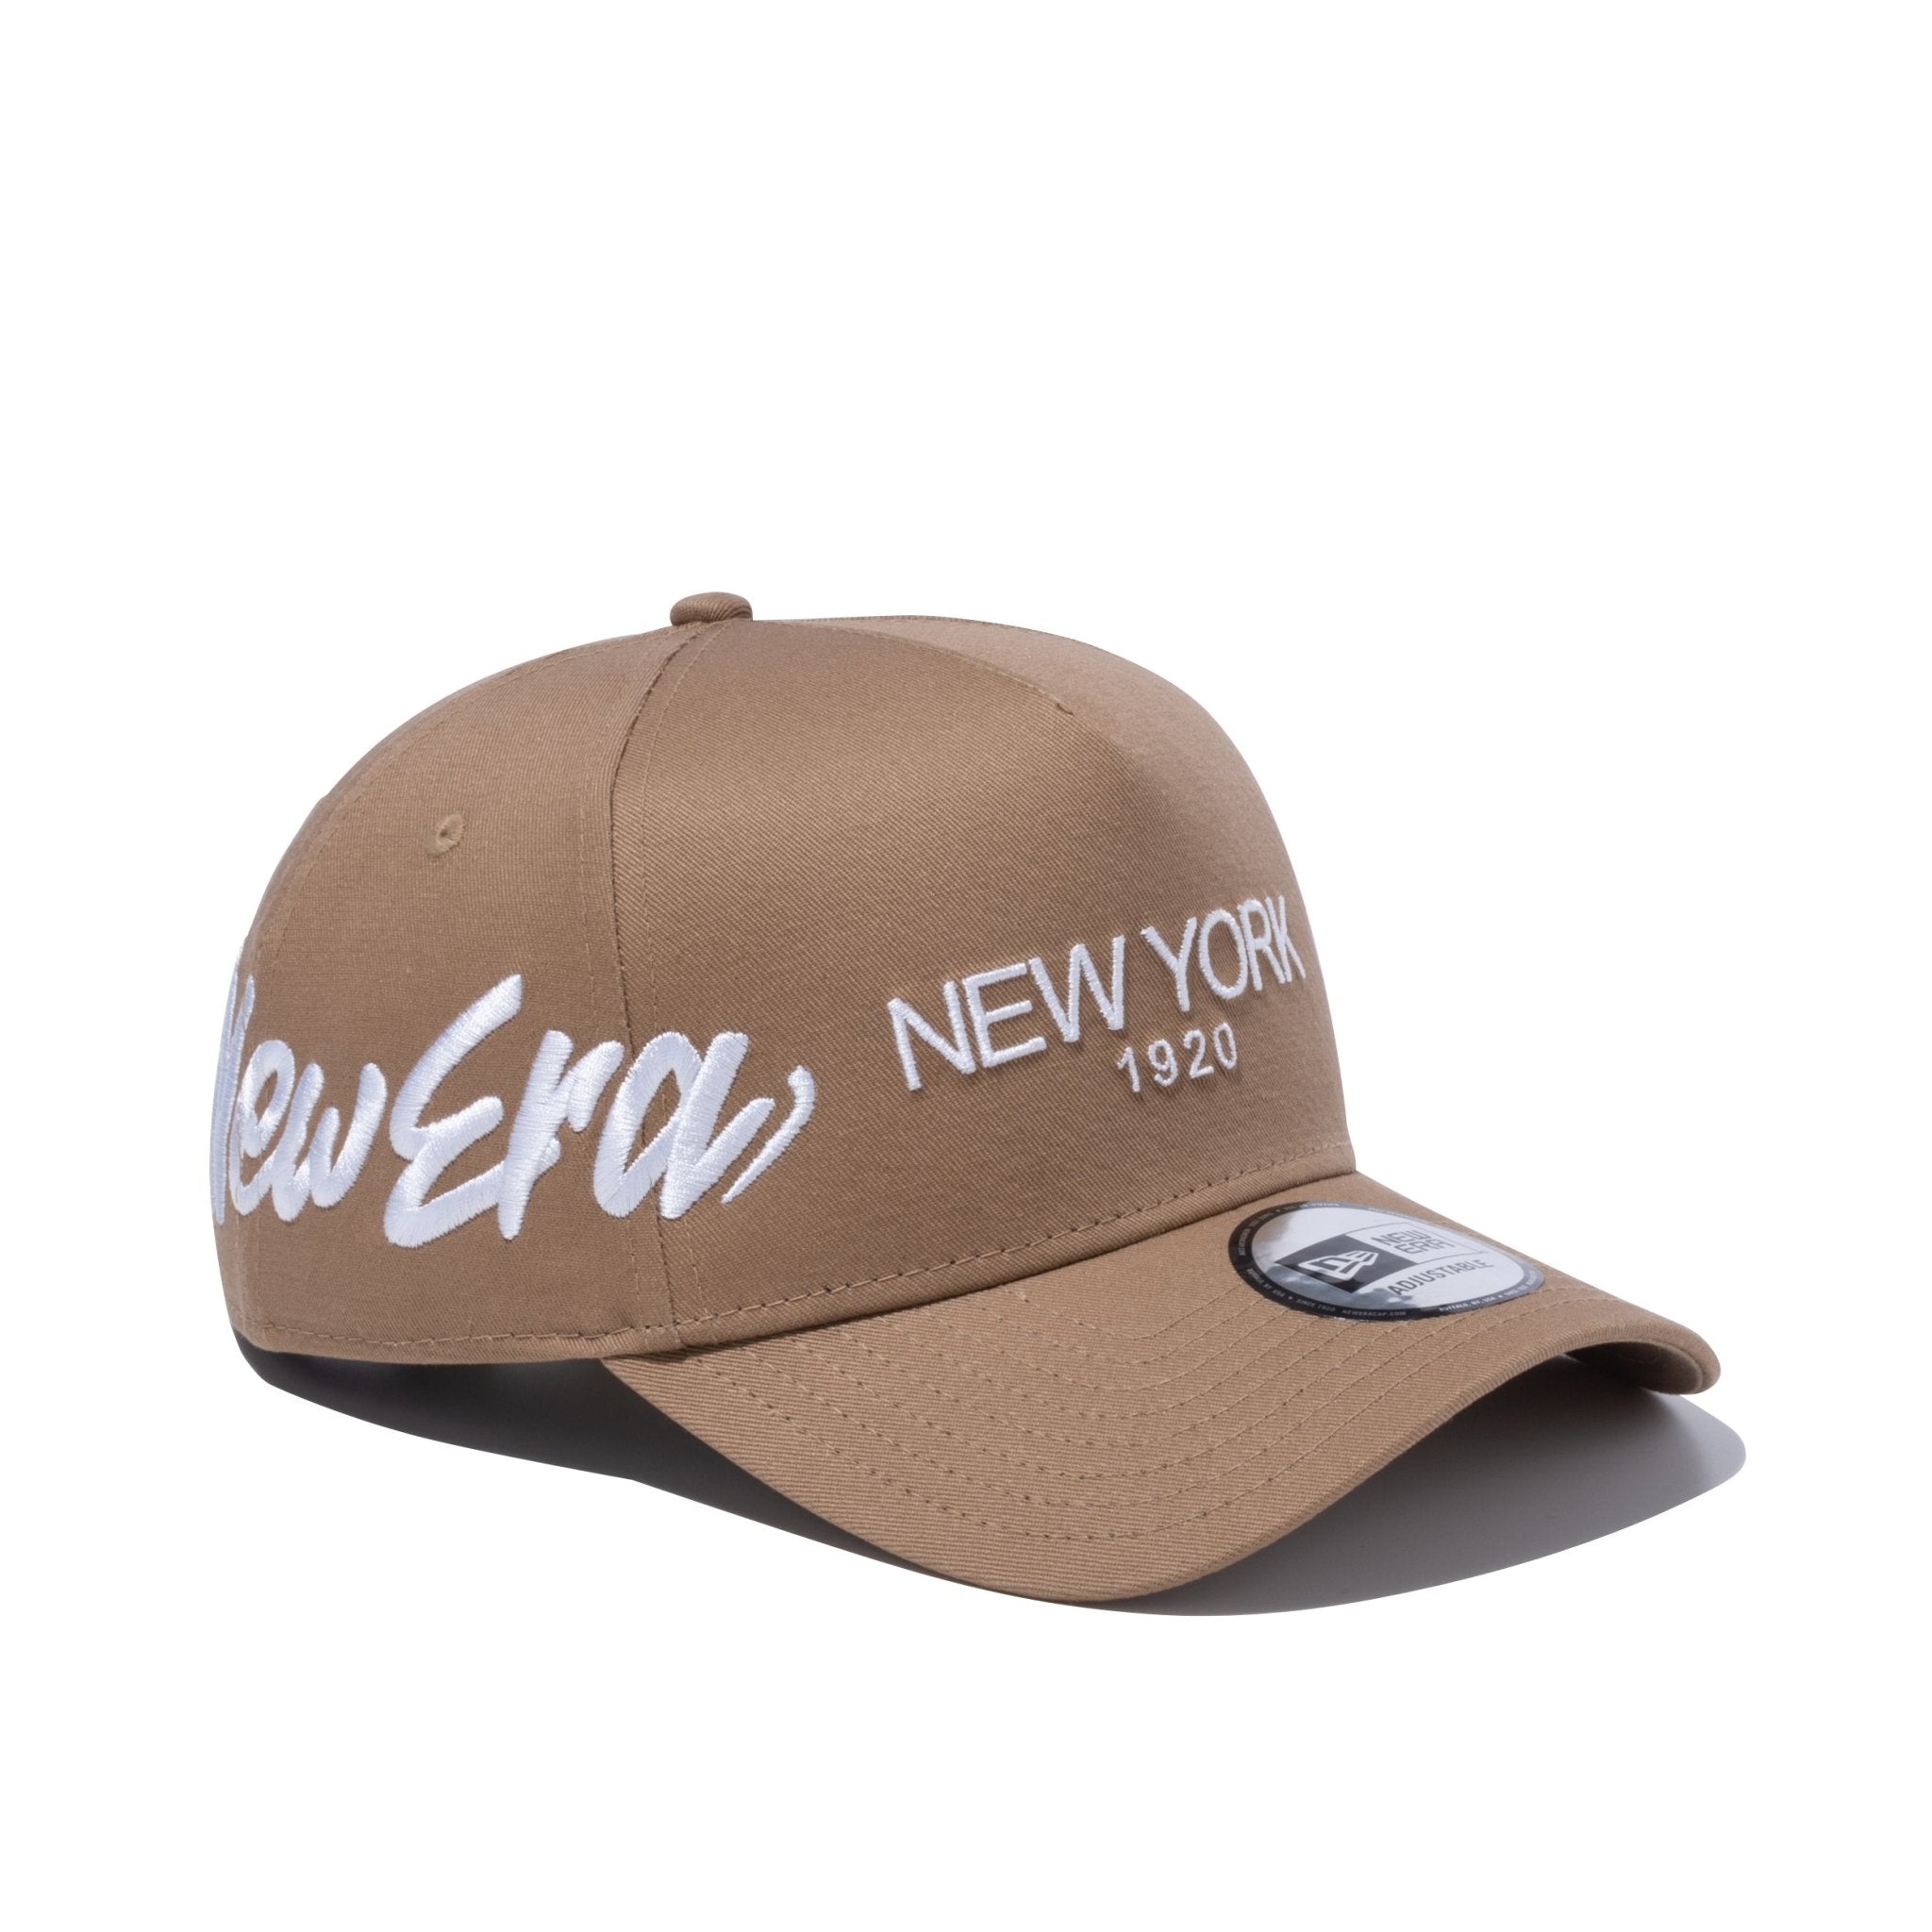 9FORTY A-Frame Tagging NEW ERA NEW YORK 1920 カーキ | ニューエラ